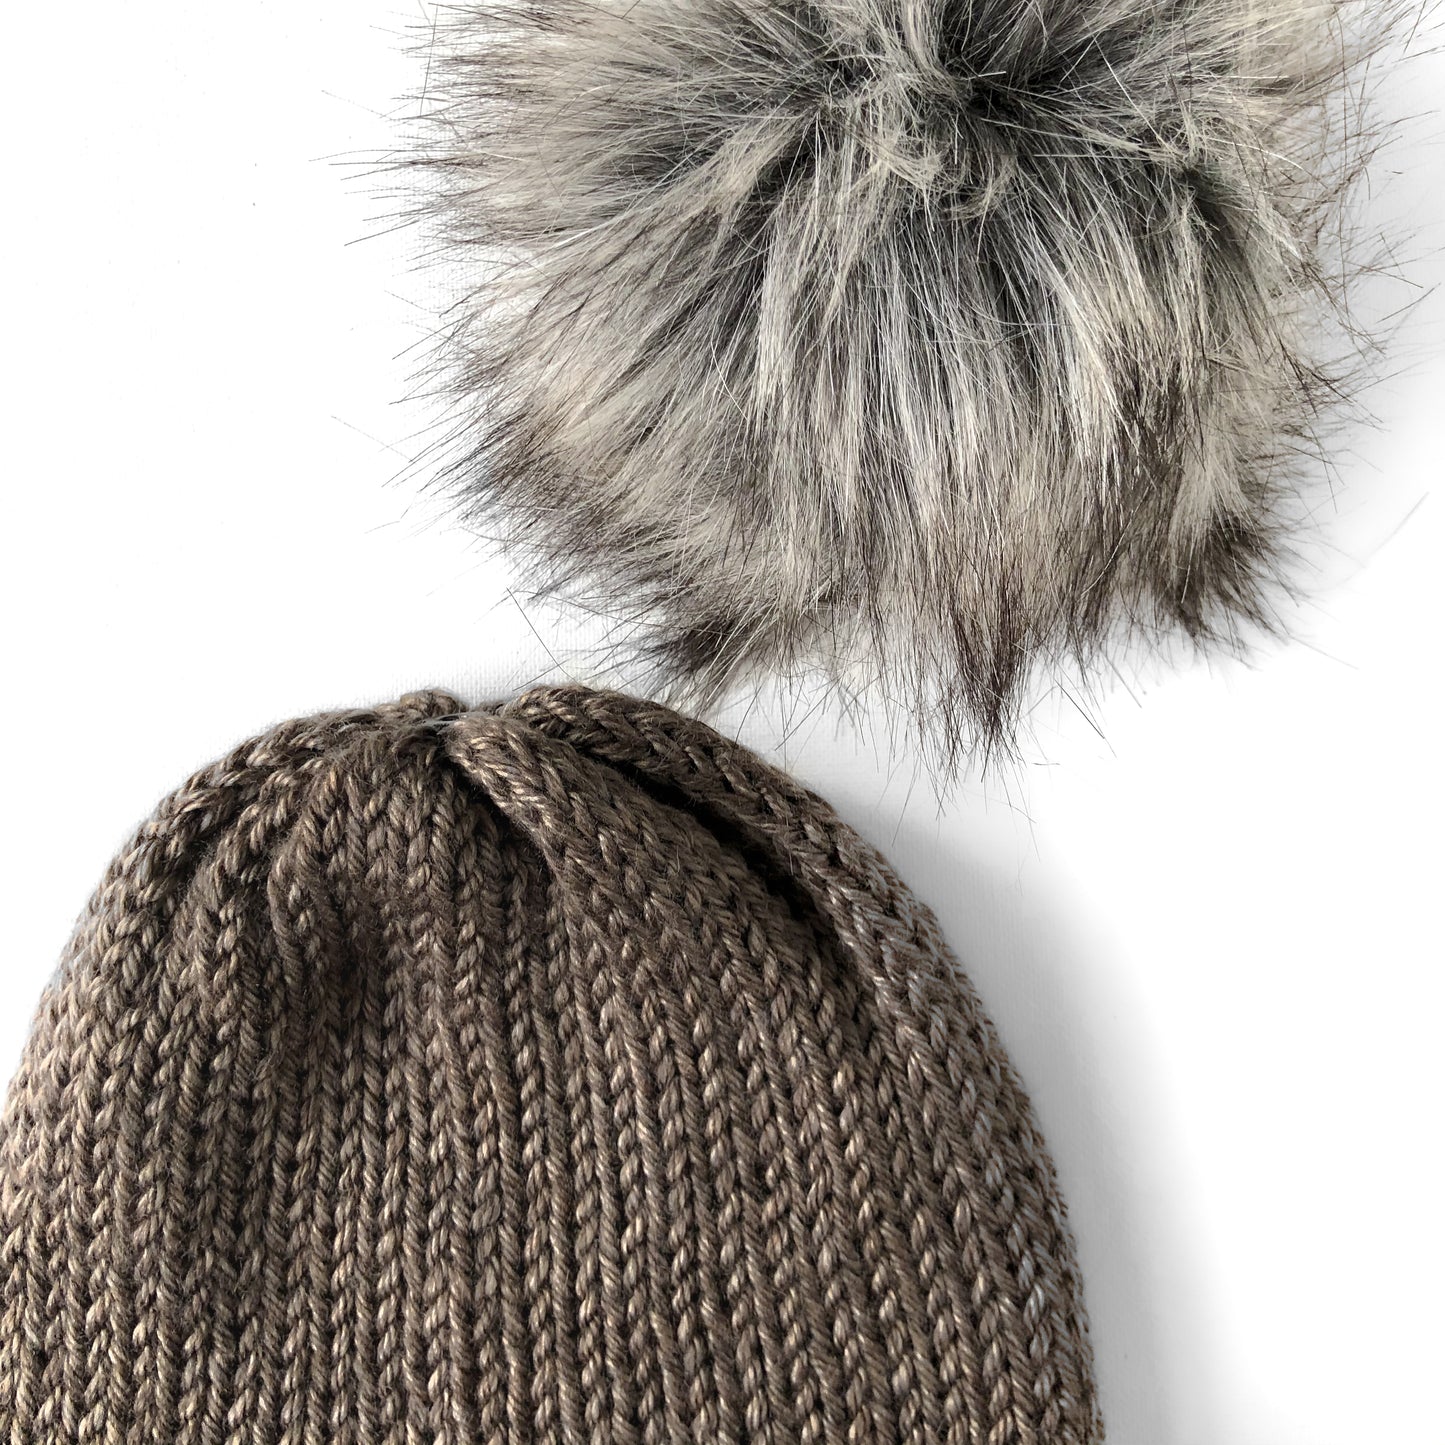 Double Knit Pom Beanie - Mammoth Cave